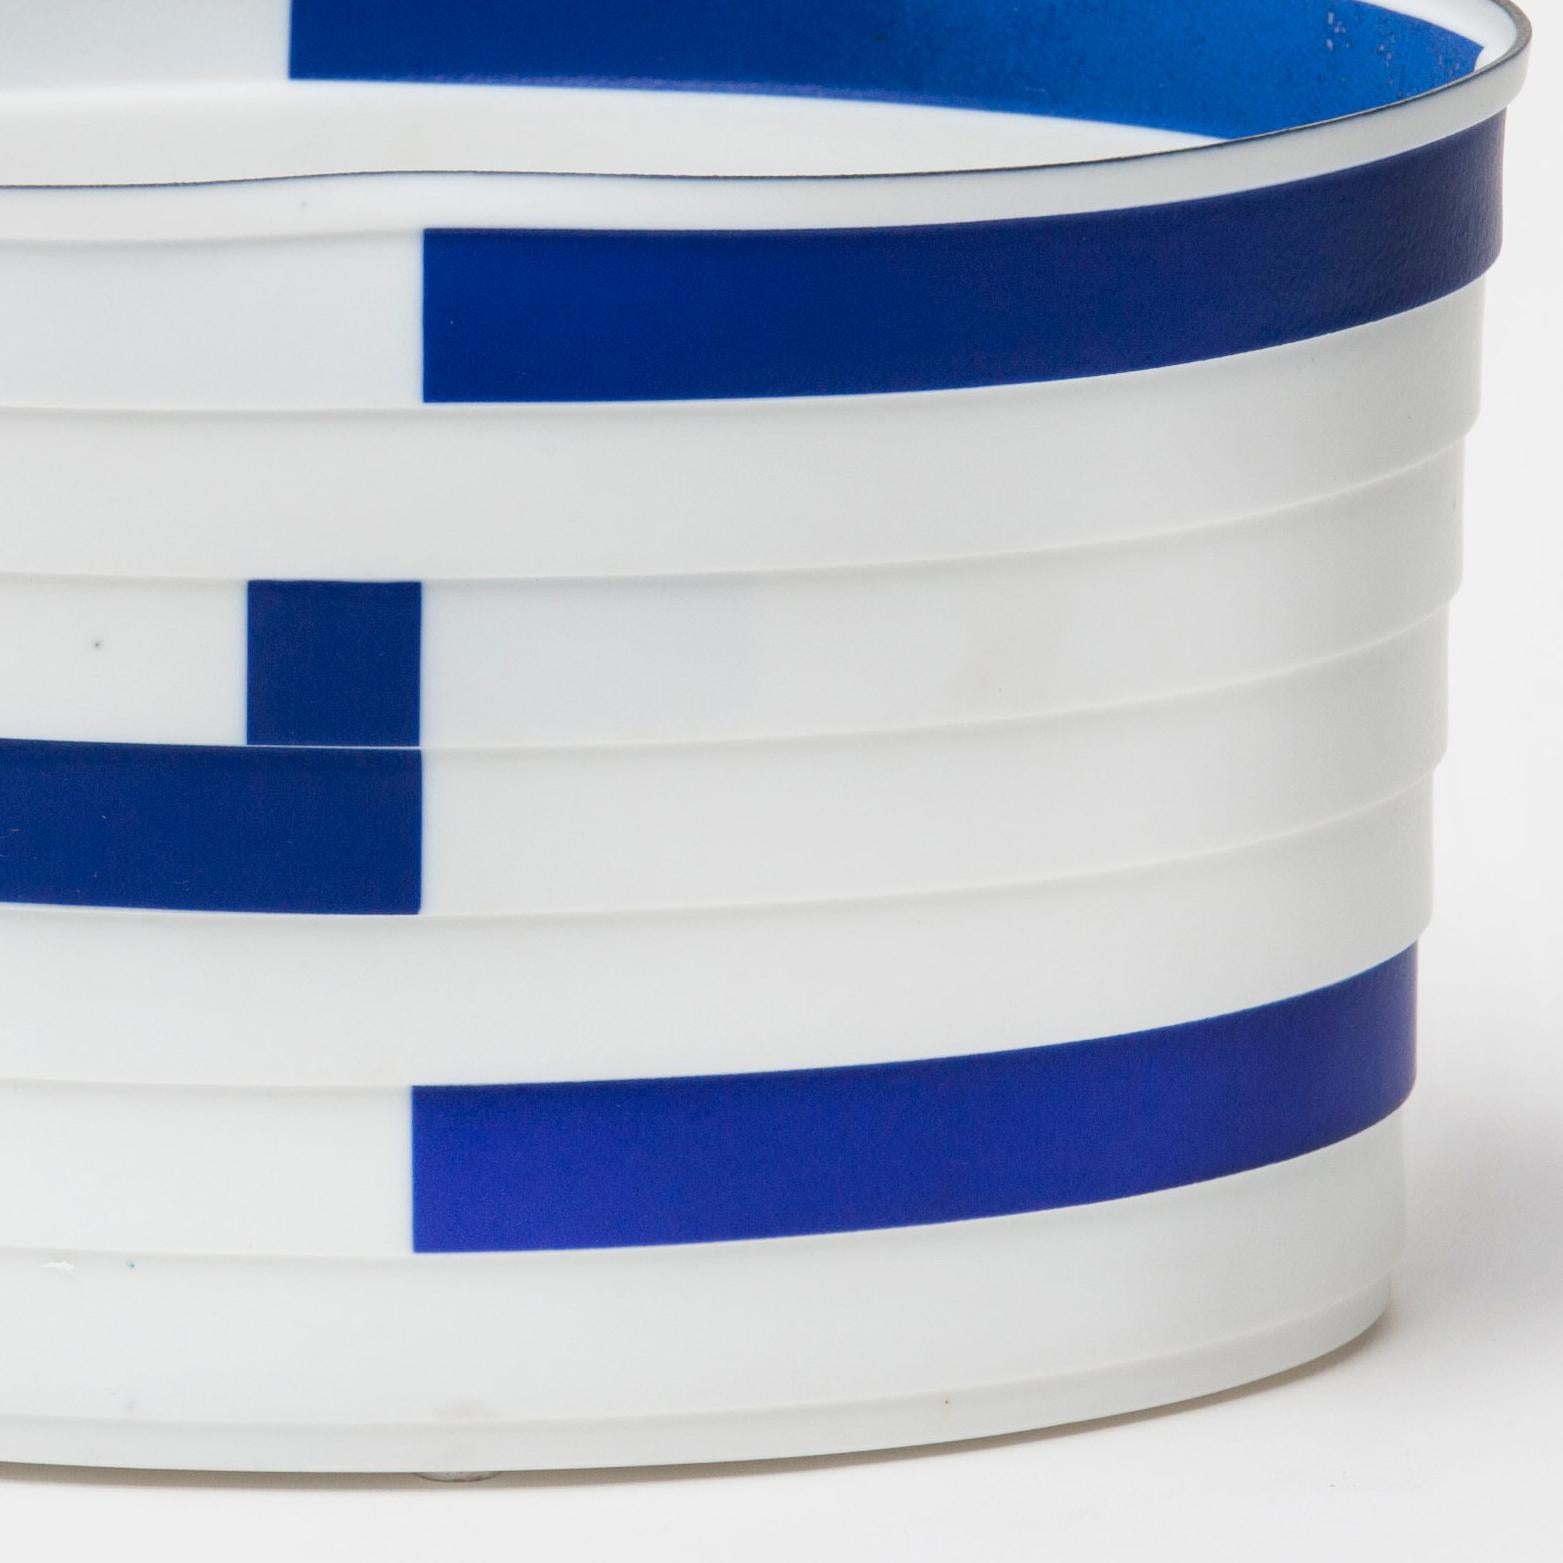 Bodil Manz, porcelain vessel in white, blue, and black, made in Denmark 3